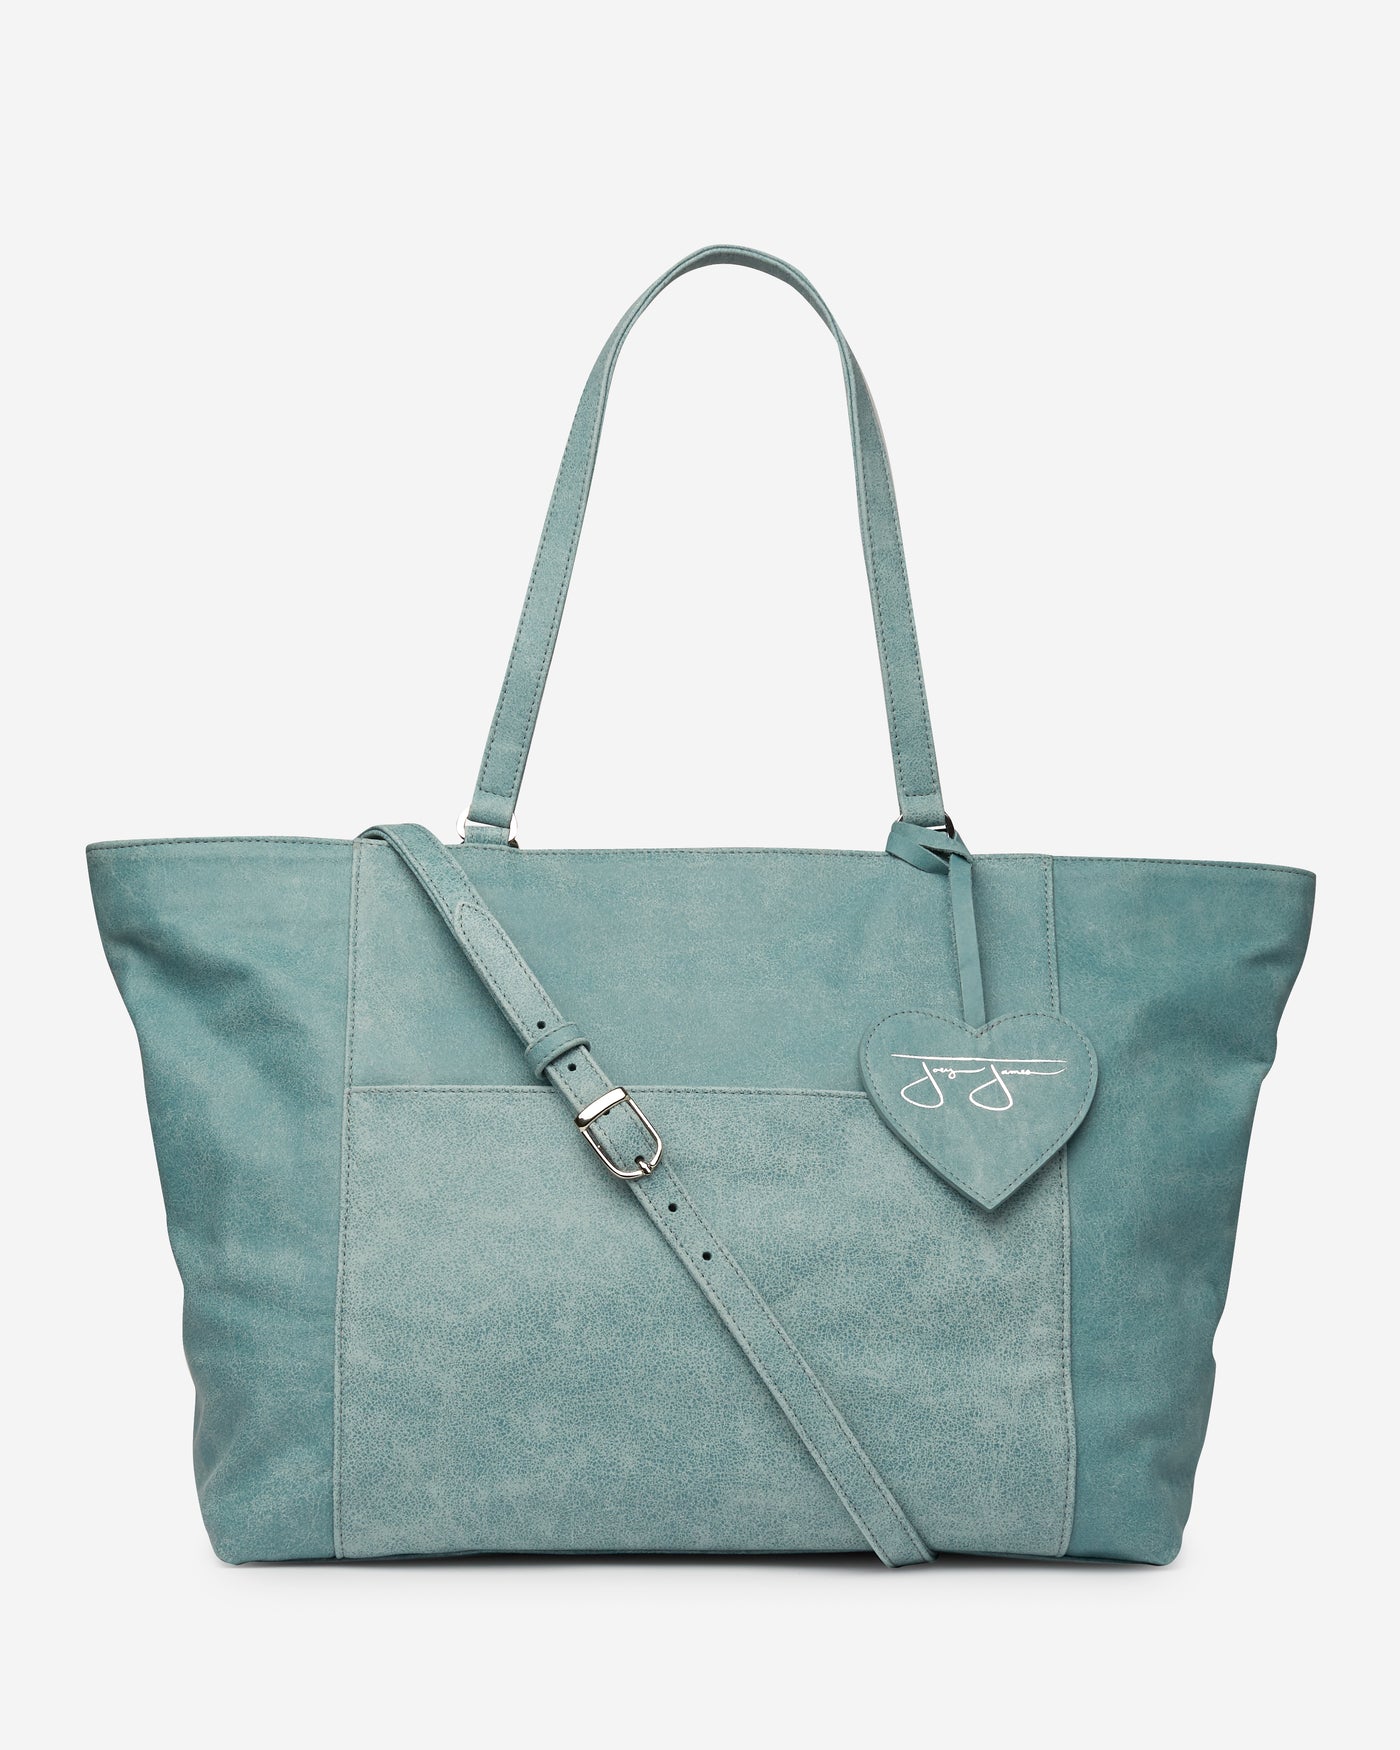 Samantha Tote - Turquoise Samantha Tote Joey James, The Label   